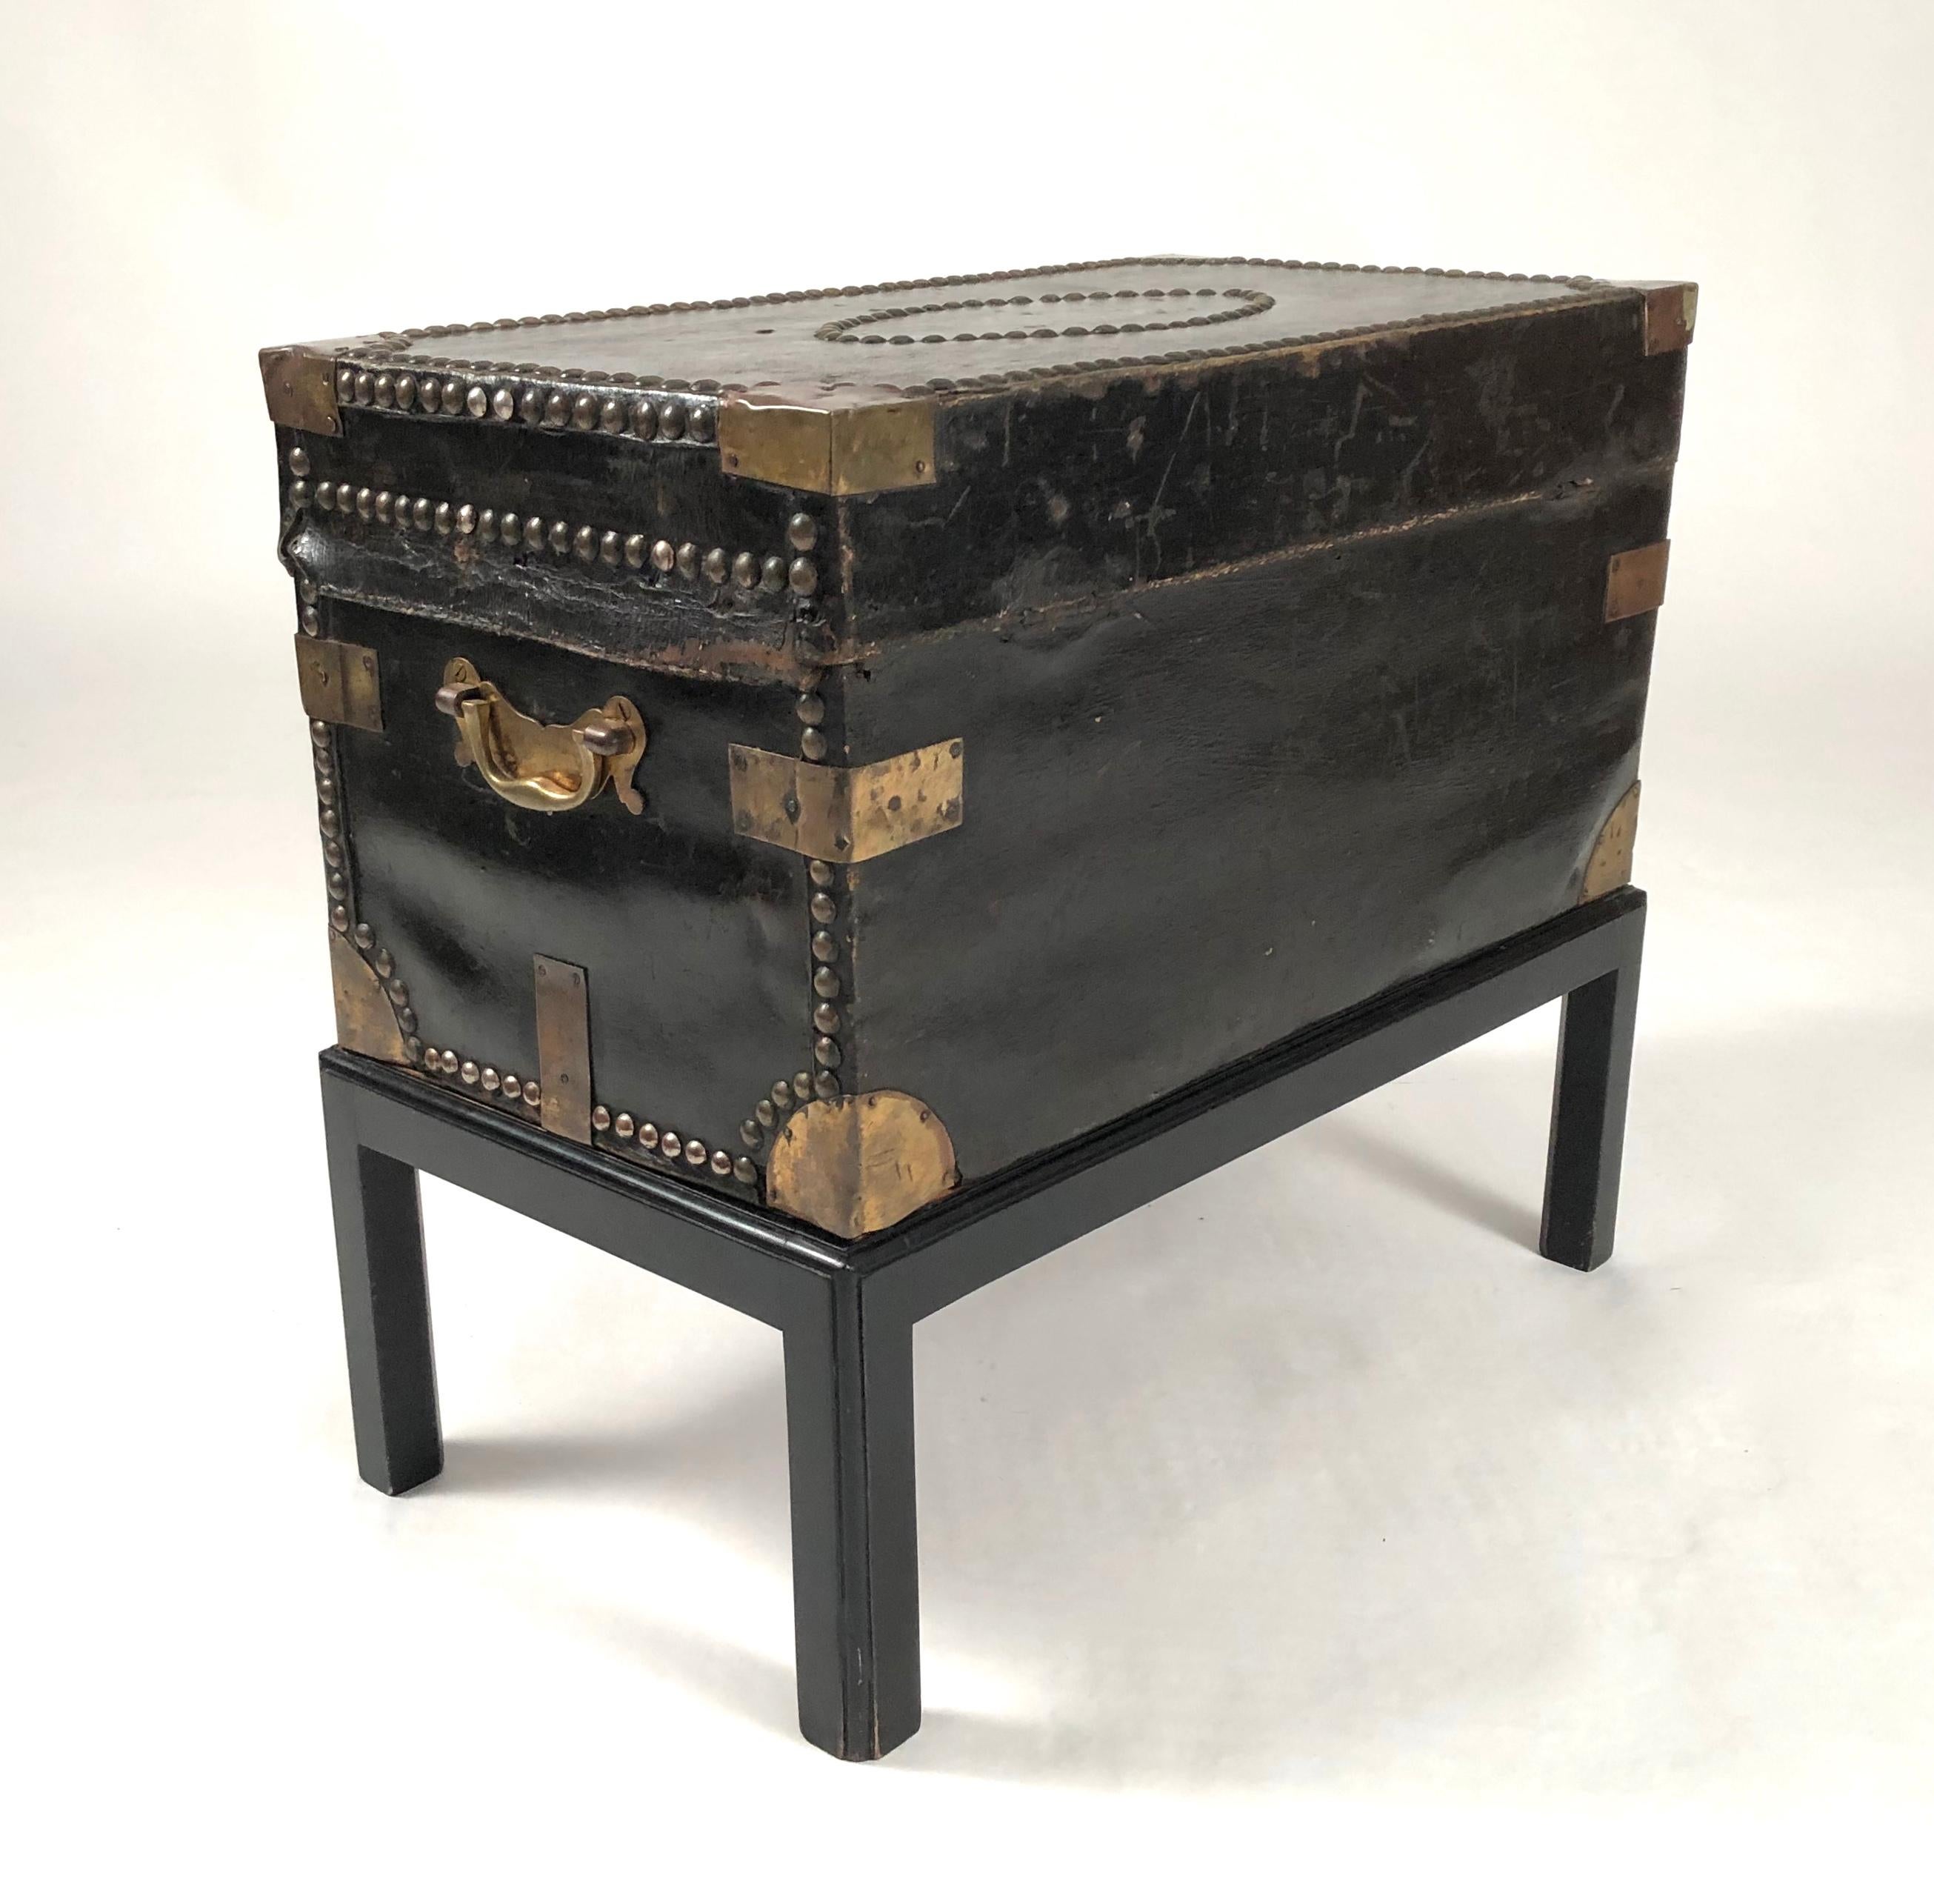 English Brass Stud Decorated Leather Sea Captain's Chest on Stand, circa 1810-1820